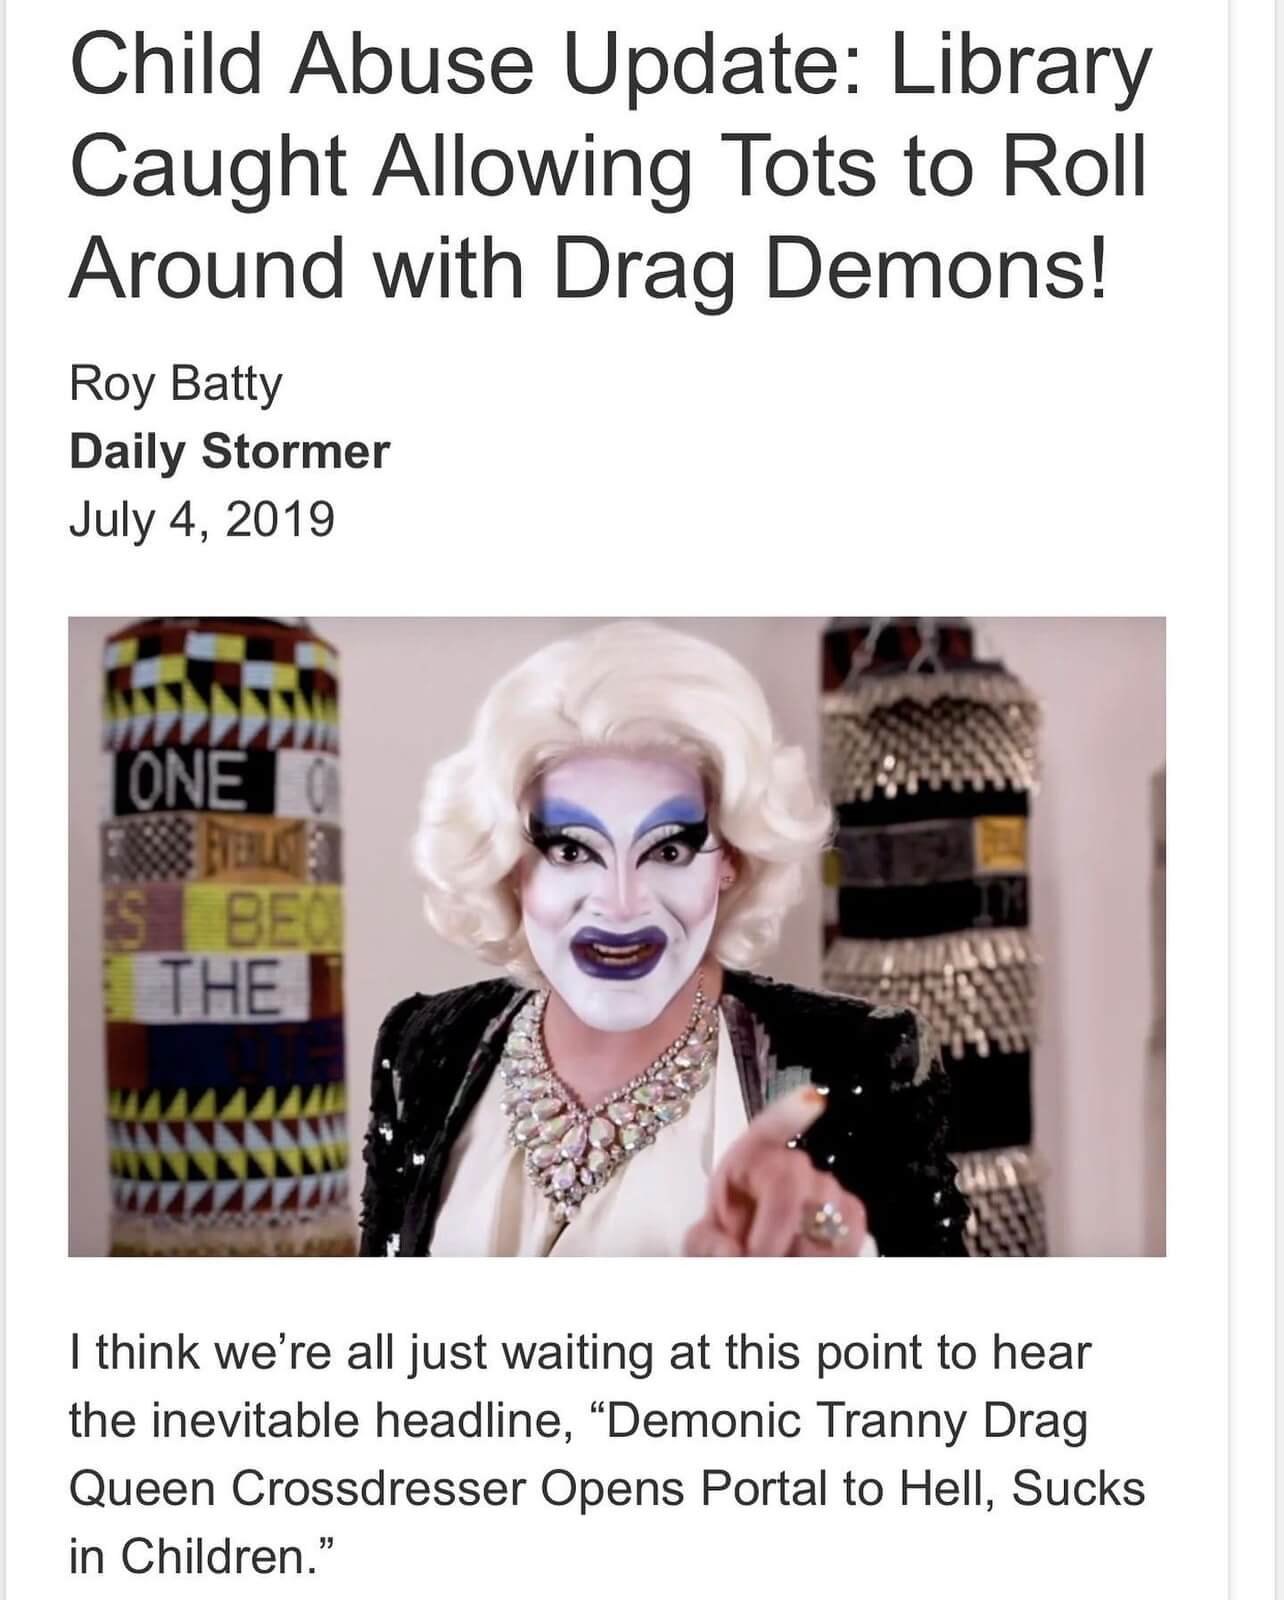 Screen shot of an online article from Daily Stormer. The headline reads, "Child Abuse Update: Library Caught Allowing Tots to Roll Around with Drag Demons!" The accompanying photo shows Carla Rossi in a medium-length white wig and dark violet lipstick, wearing an embroidered black jacket with padded shoulders and pointing at the camera. Below the photo is the following text: "I think we're all just waiting at this point to hear the inevitable headline, 'Demonic Tranny Drag Queen Crossdresser Opens Portal to Hell, Sucks in Children.'"